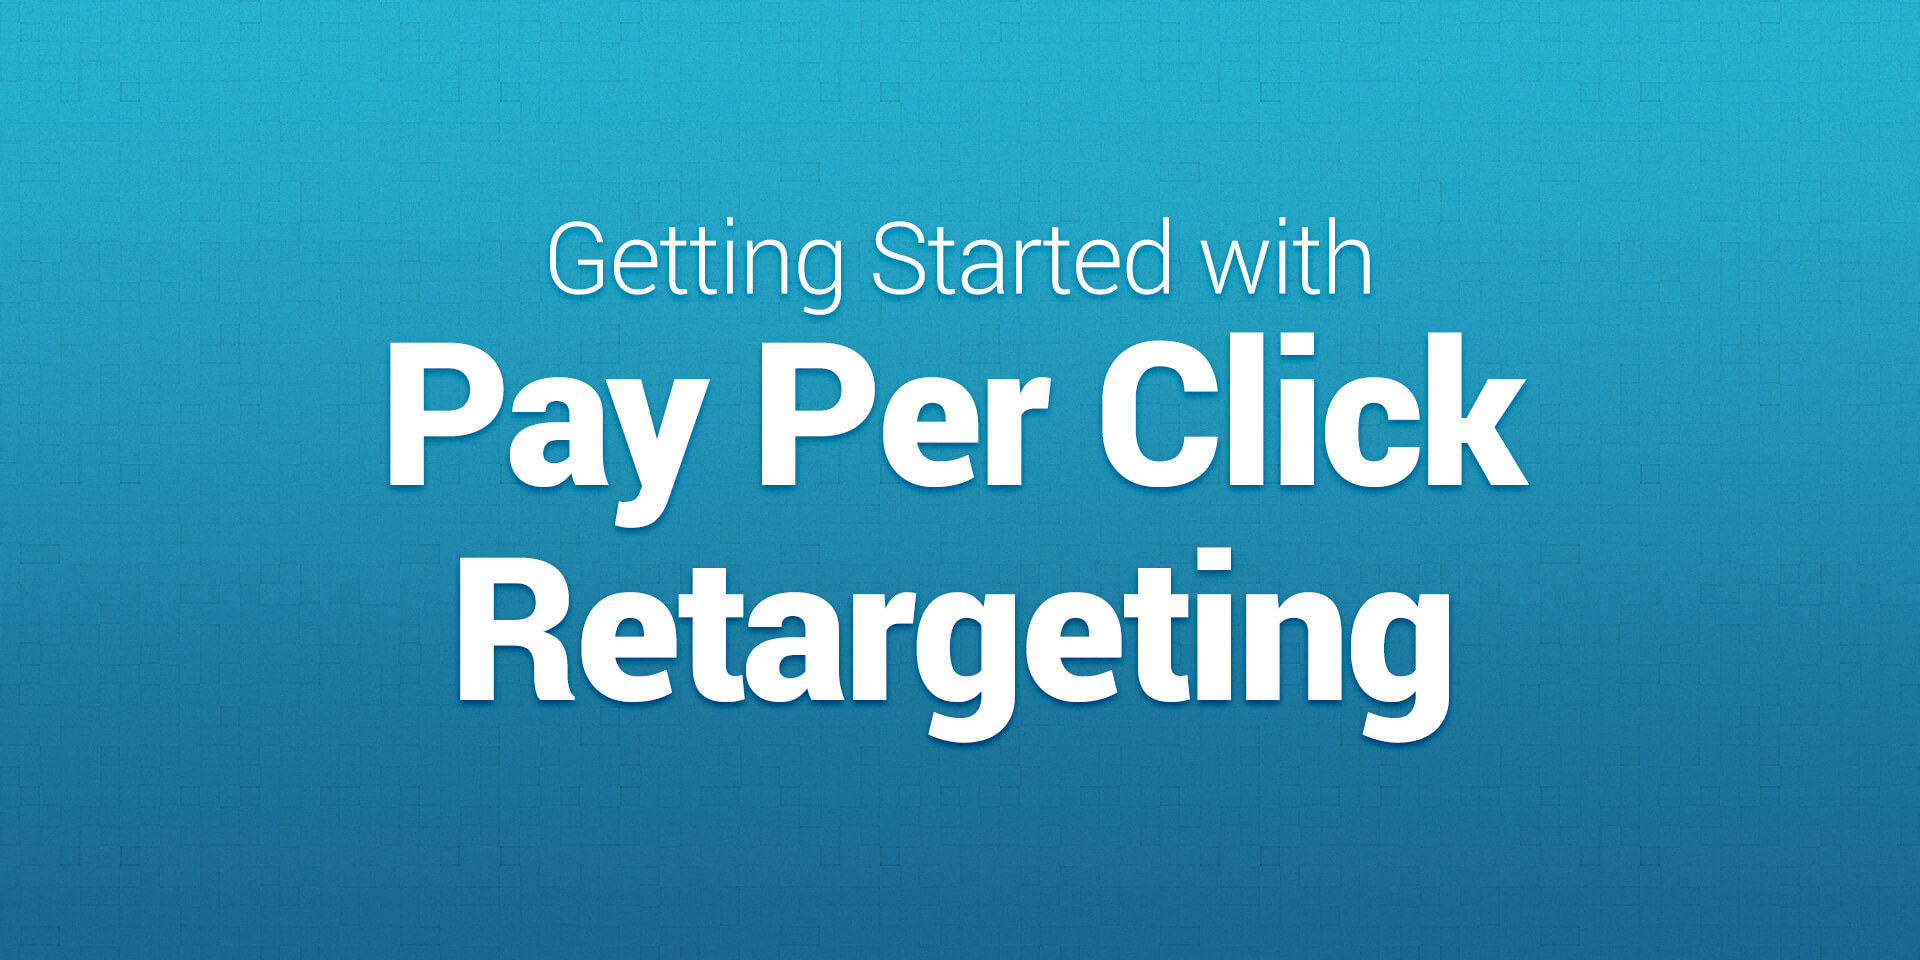 Getting started with pay-per-click retargeting